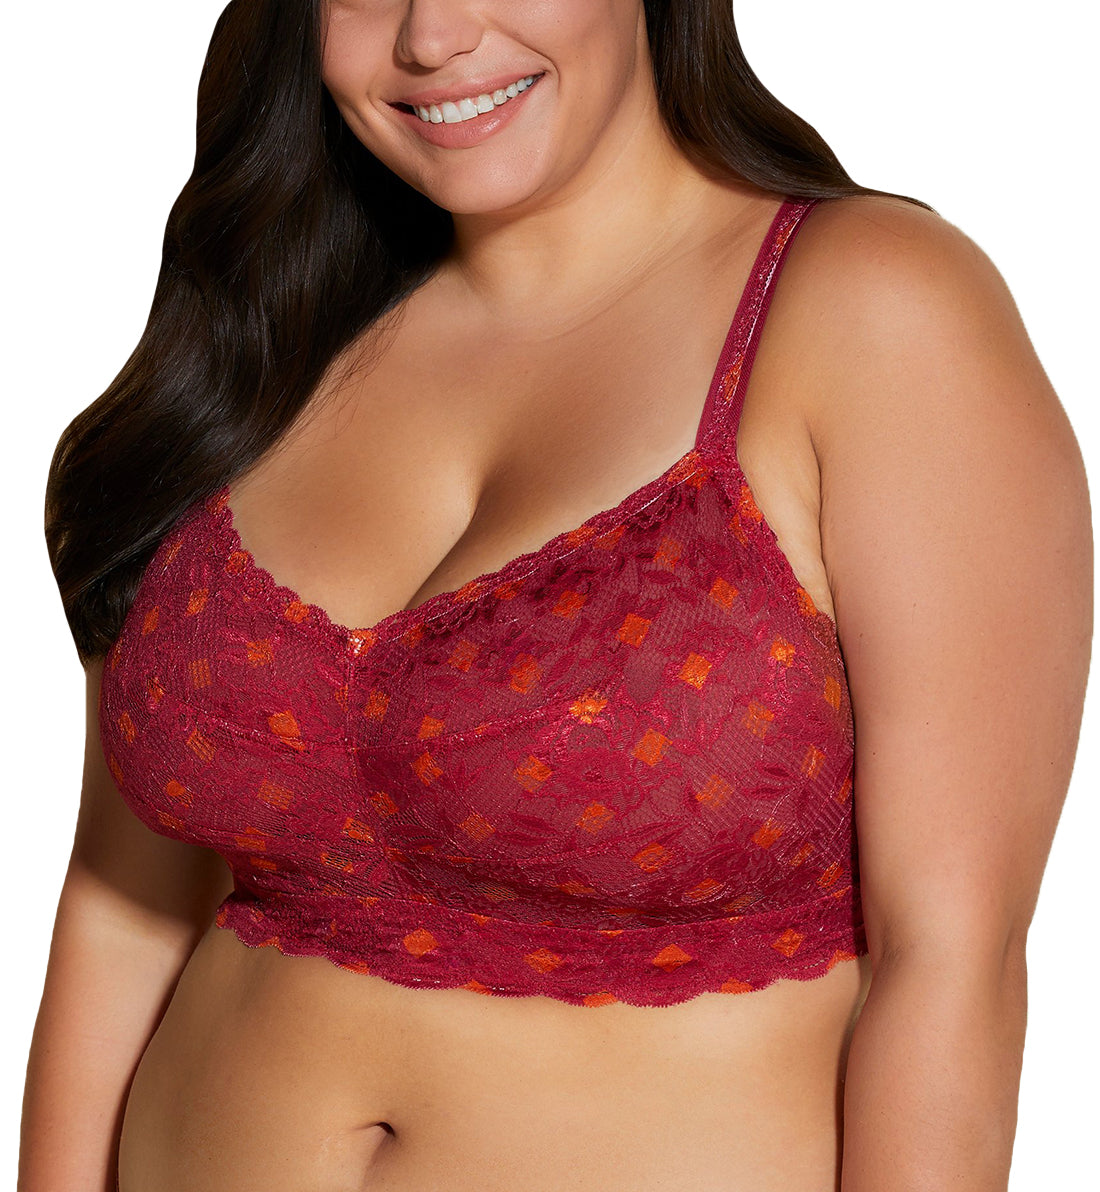 Cosabella Never Say Never Printed SUPER CURVY Sweetie Bralette (NEVEP1322),Small,Diamond Deep Ruby - Diamond Deep Ruby,Small